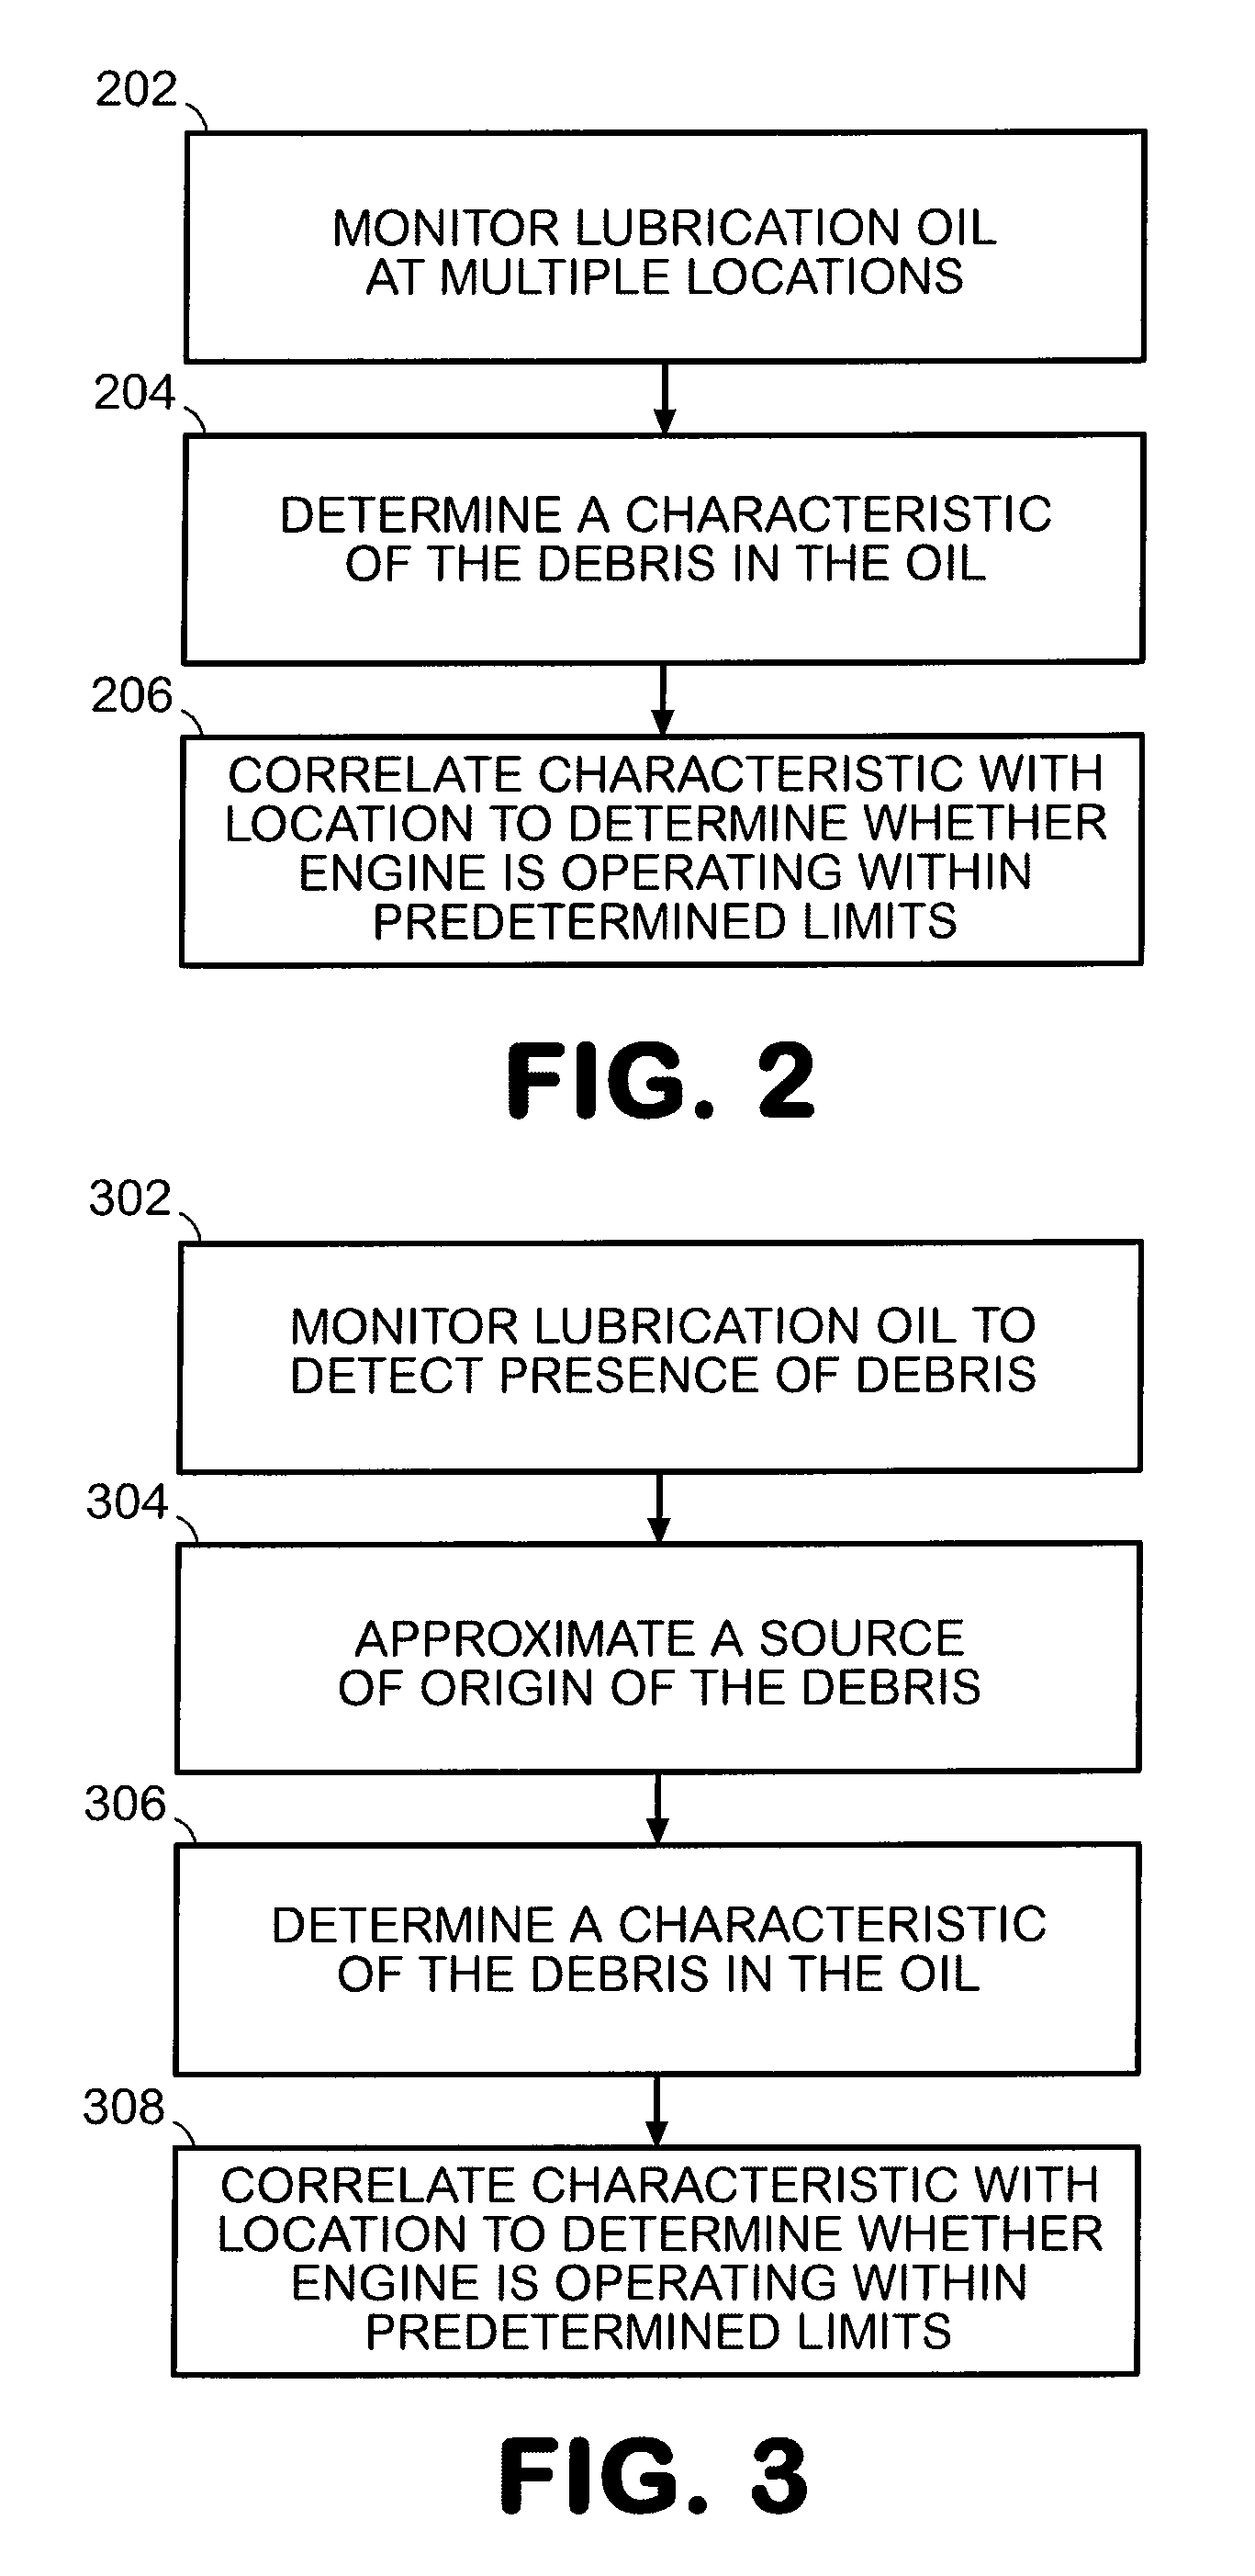 Systems and methods for monitoring gas turbine engines